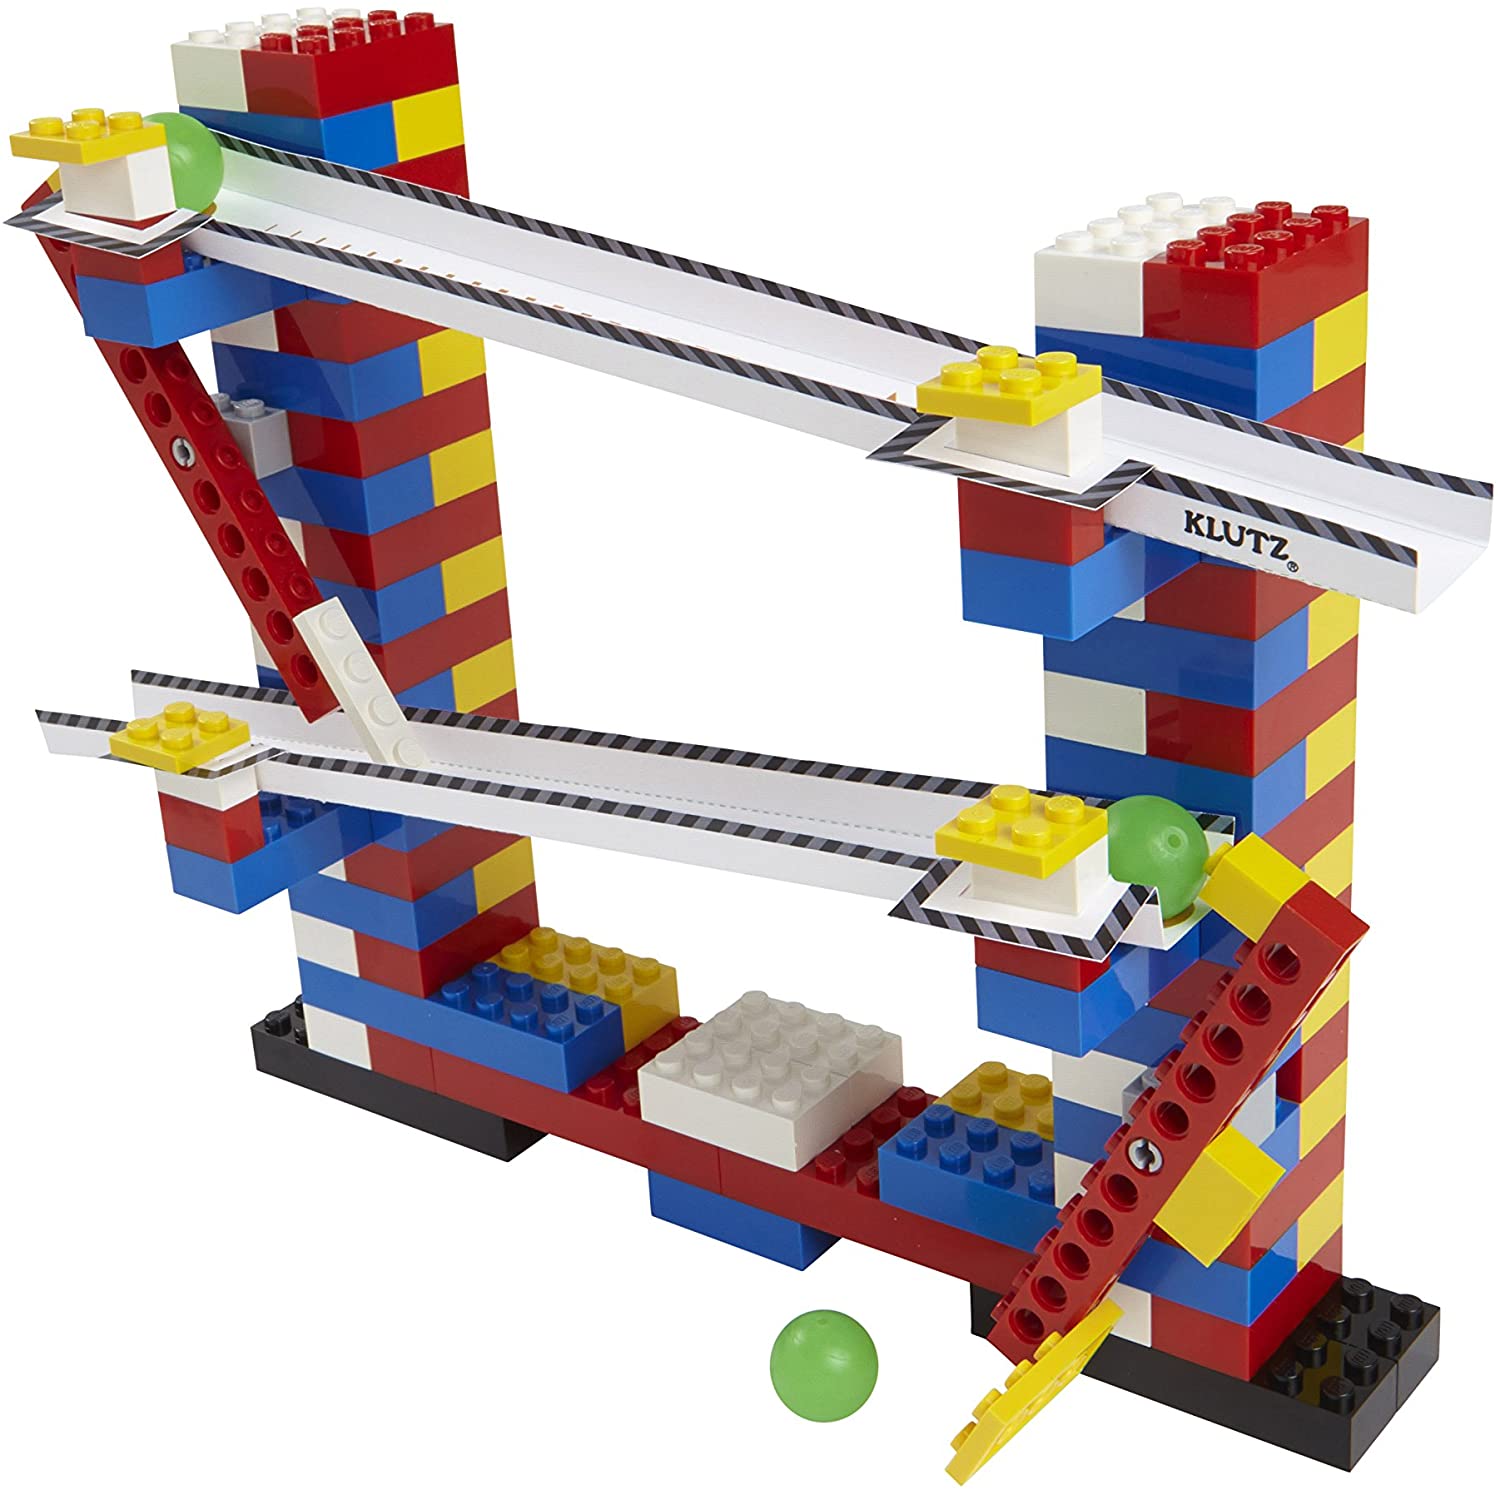 LEGO Klutz Chain Reactions Science & Building Kit